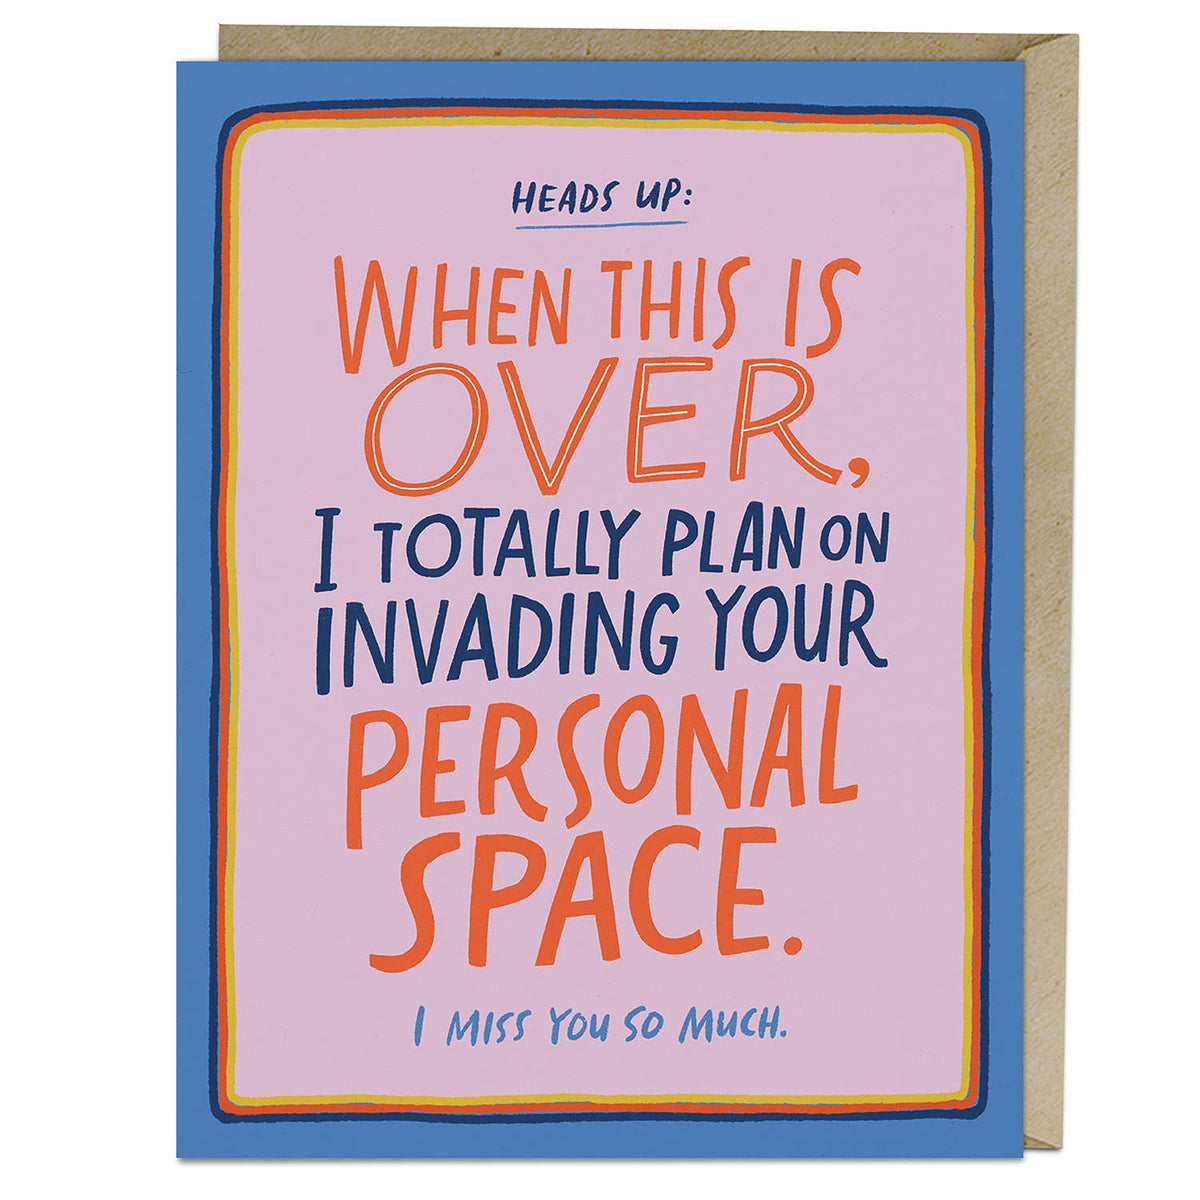 emily mcdowell greeting card reading "heads up: when this is over,  i totally plan on invading your person space. I miss you so much."